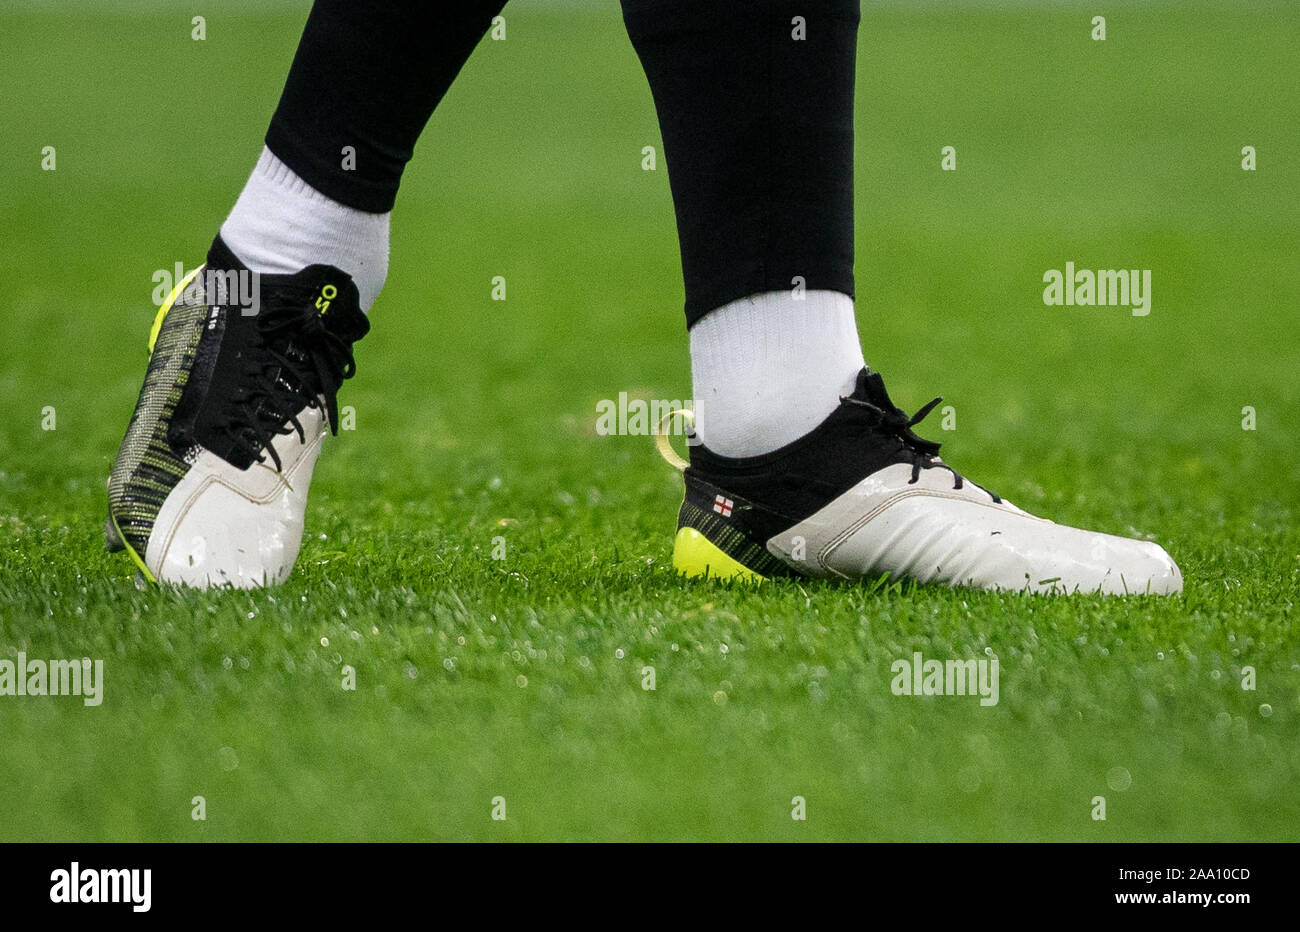 Puma football High Resolution Stock Photography and Images - Alamy